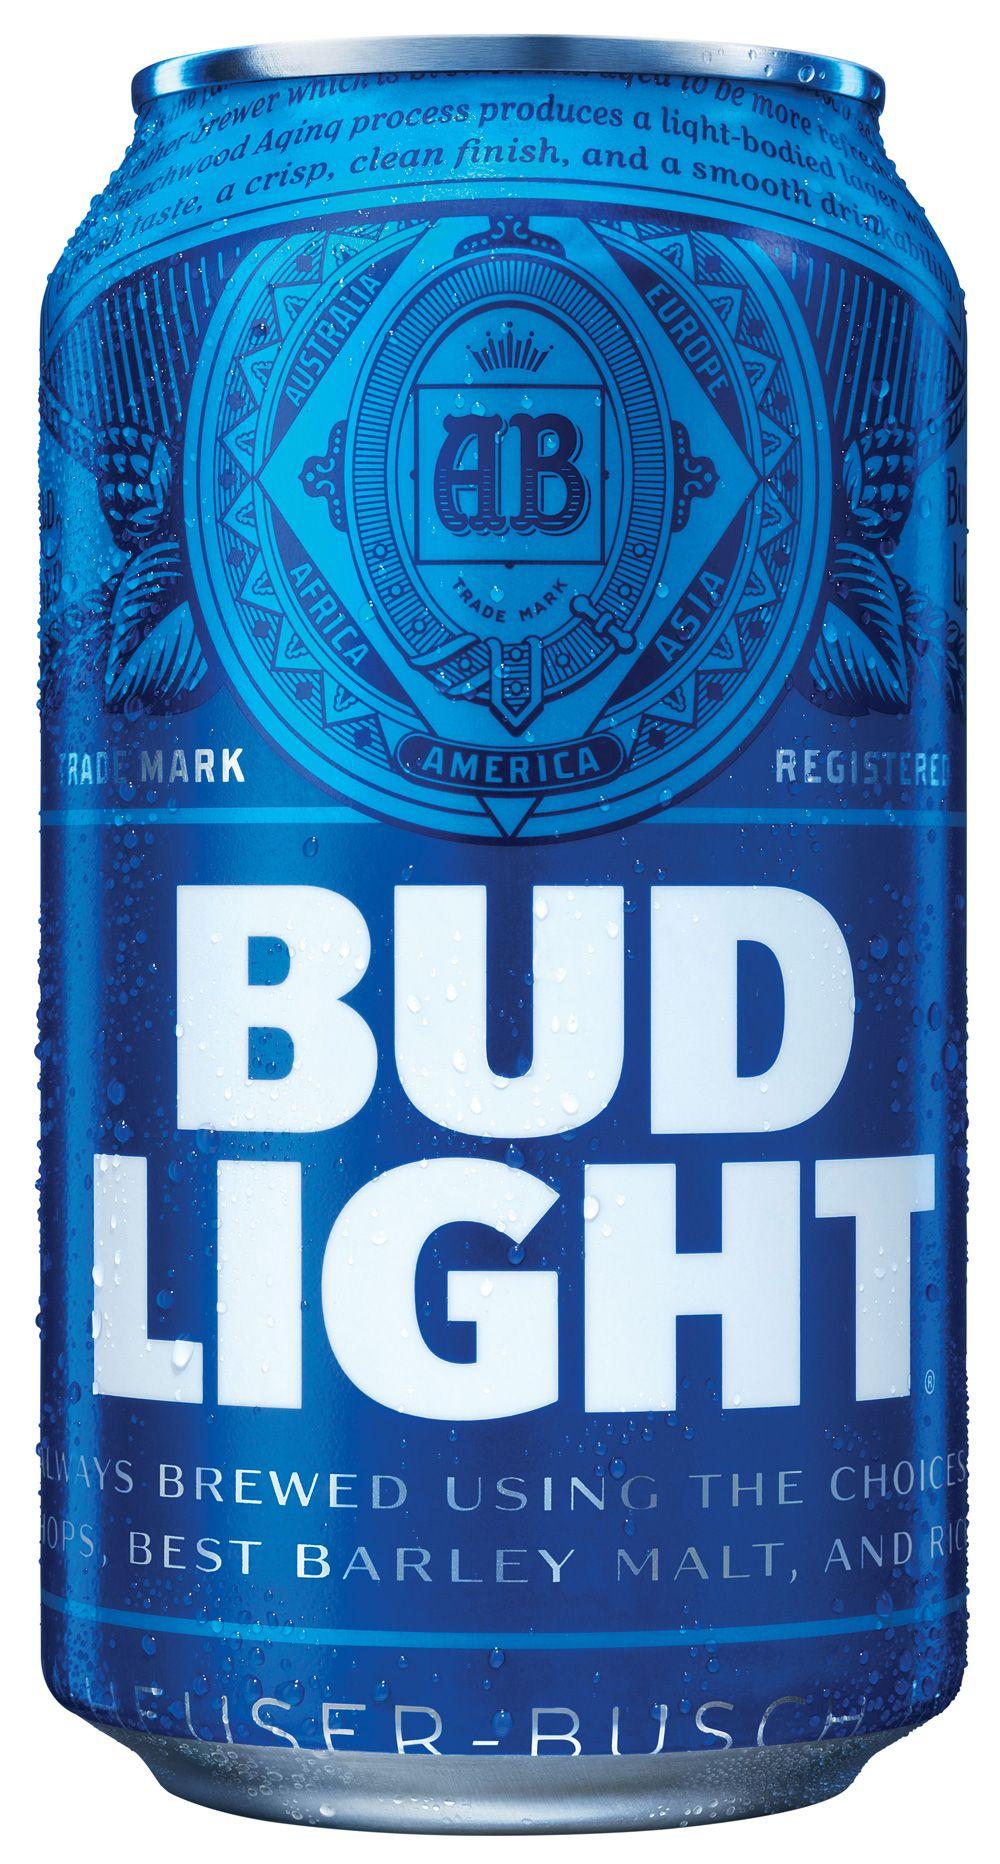 Bud Light Logo - Brand New: New Packaging for Bud Light by Jones Knowles Ritchie